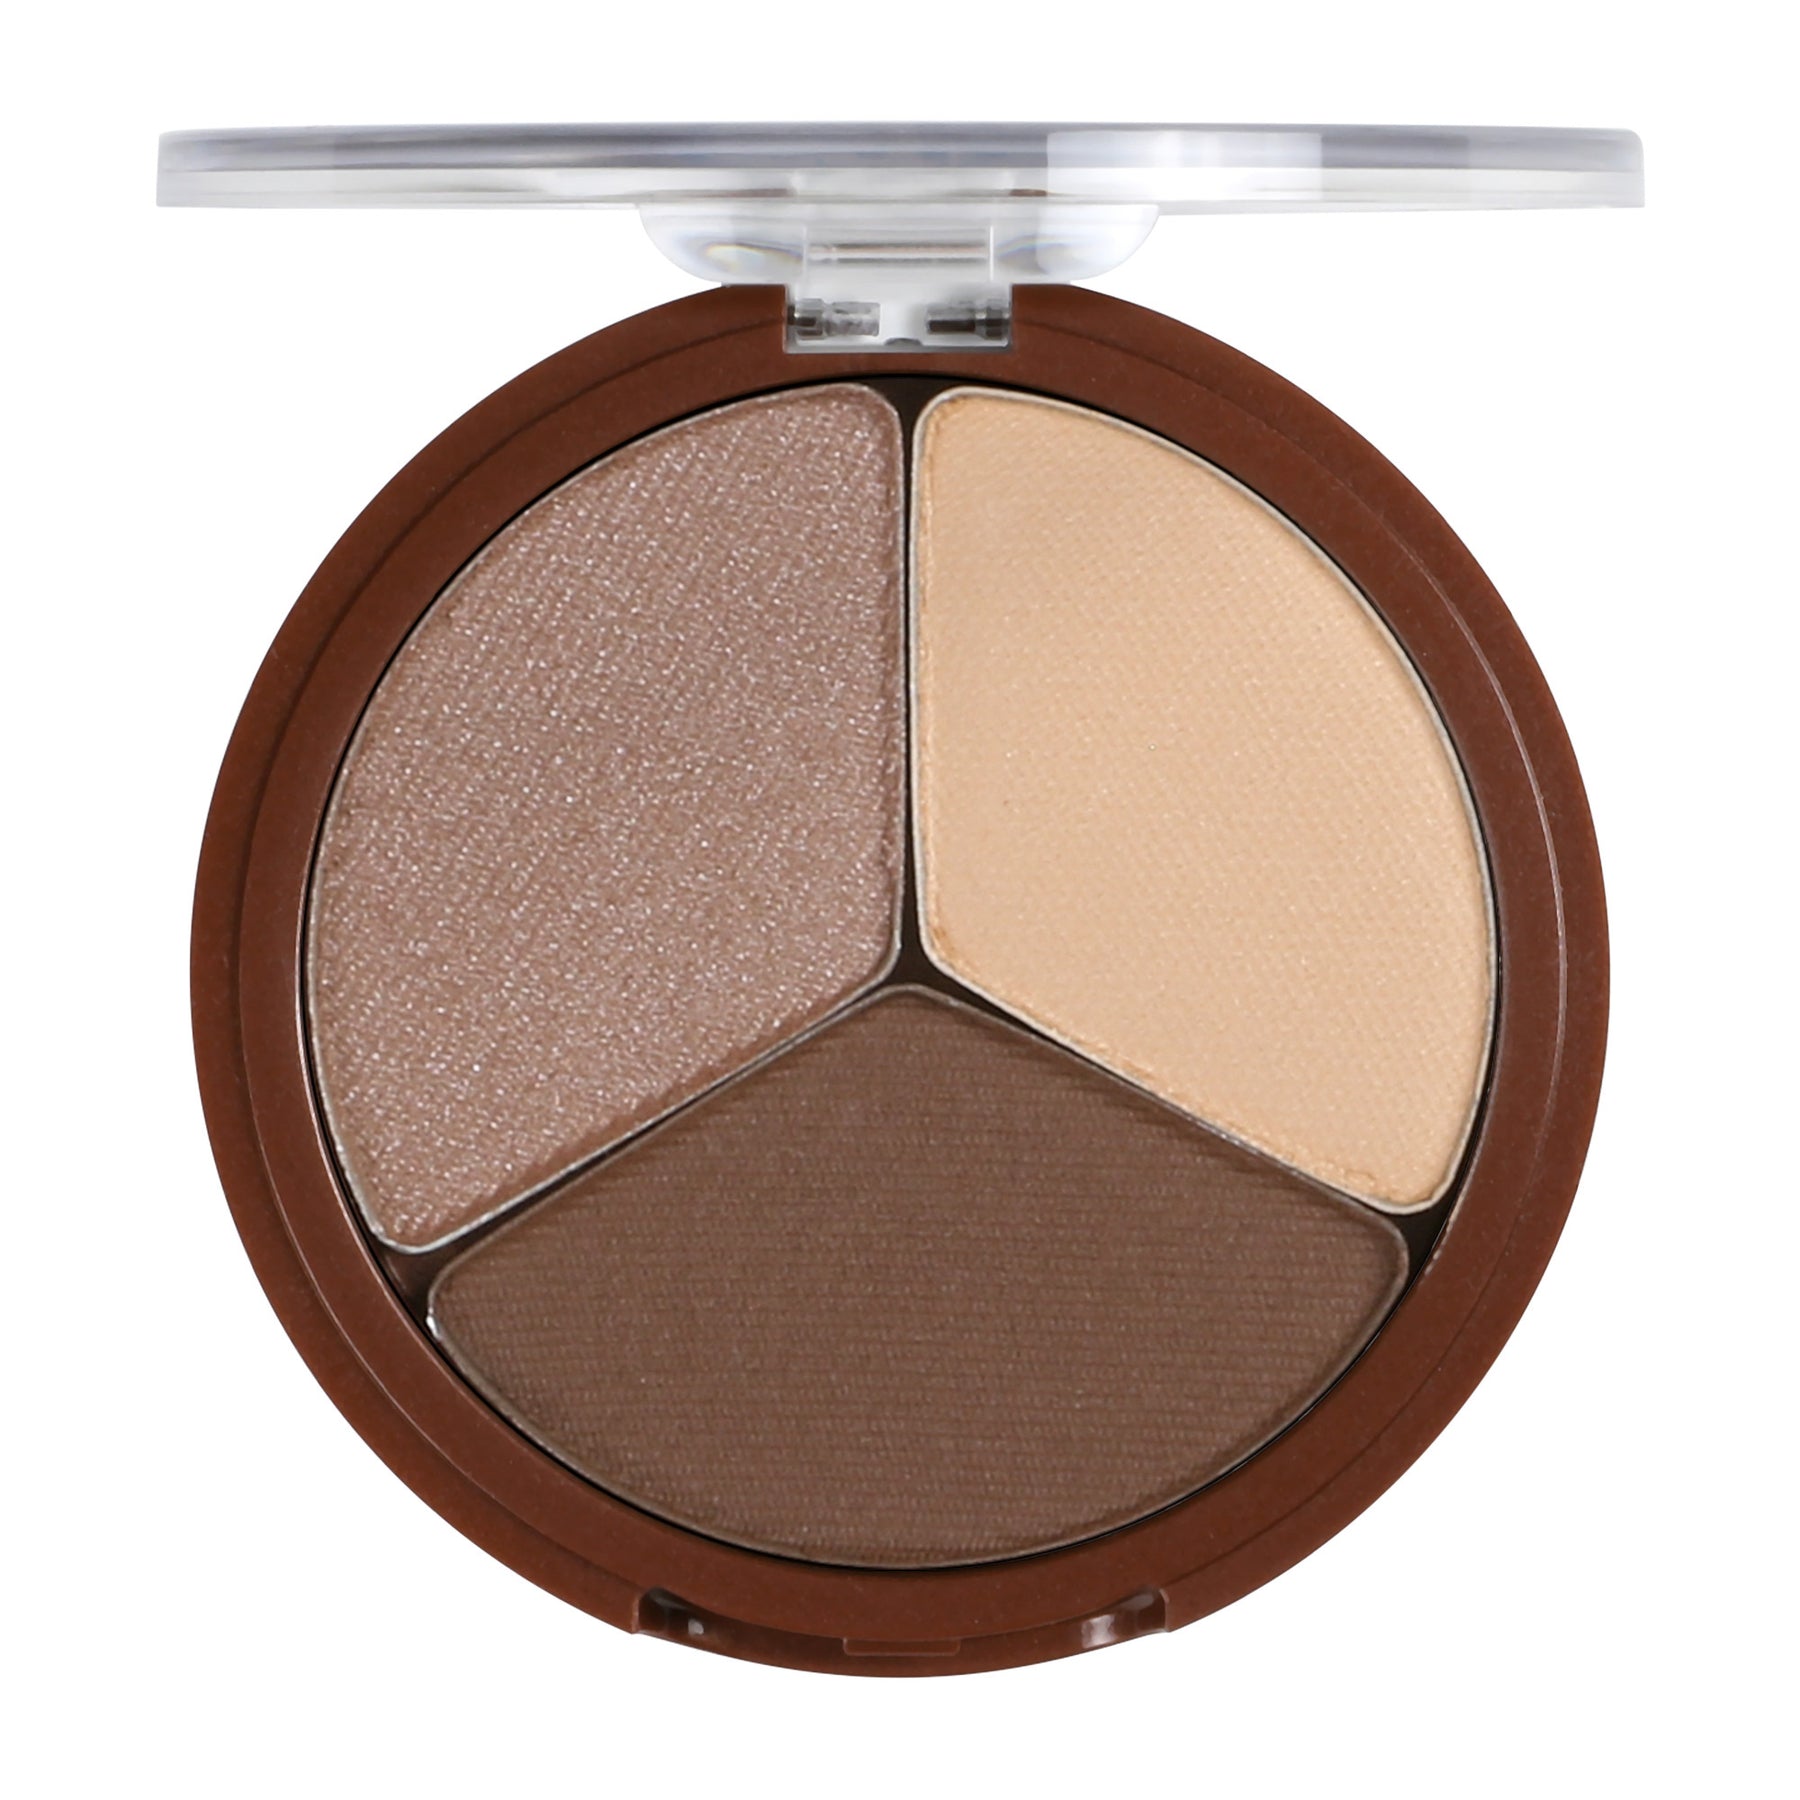 Mineral Fusion - Eye Shadow Trio - ProCare Outlet by Mineral Fusion